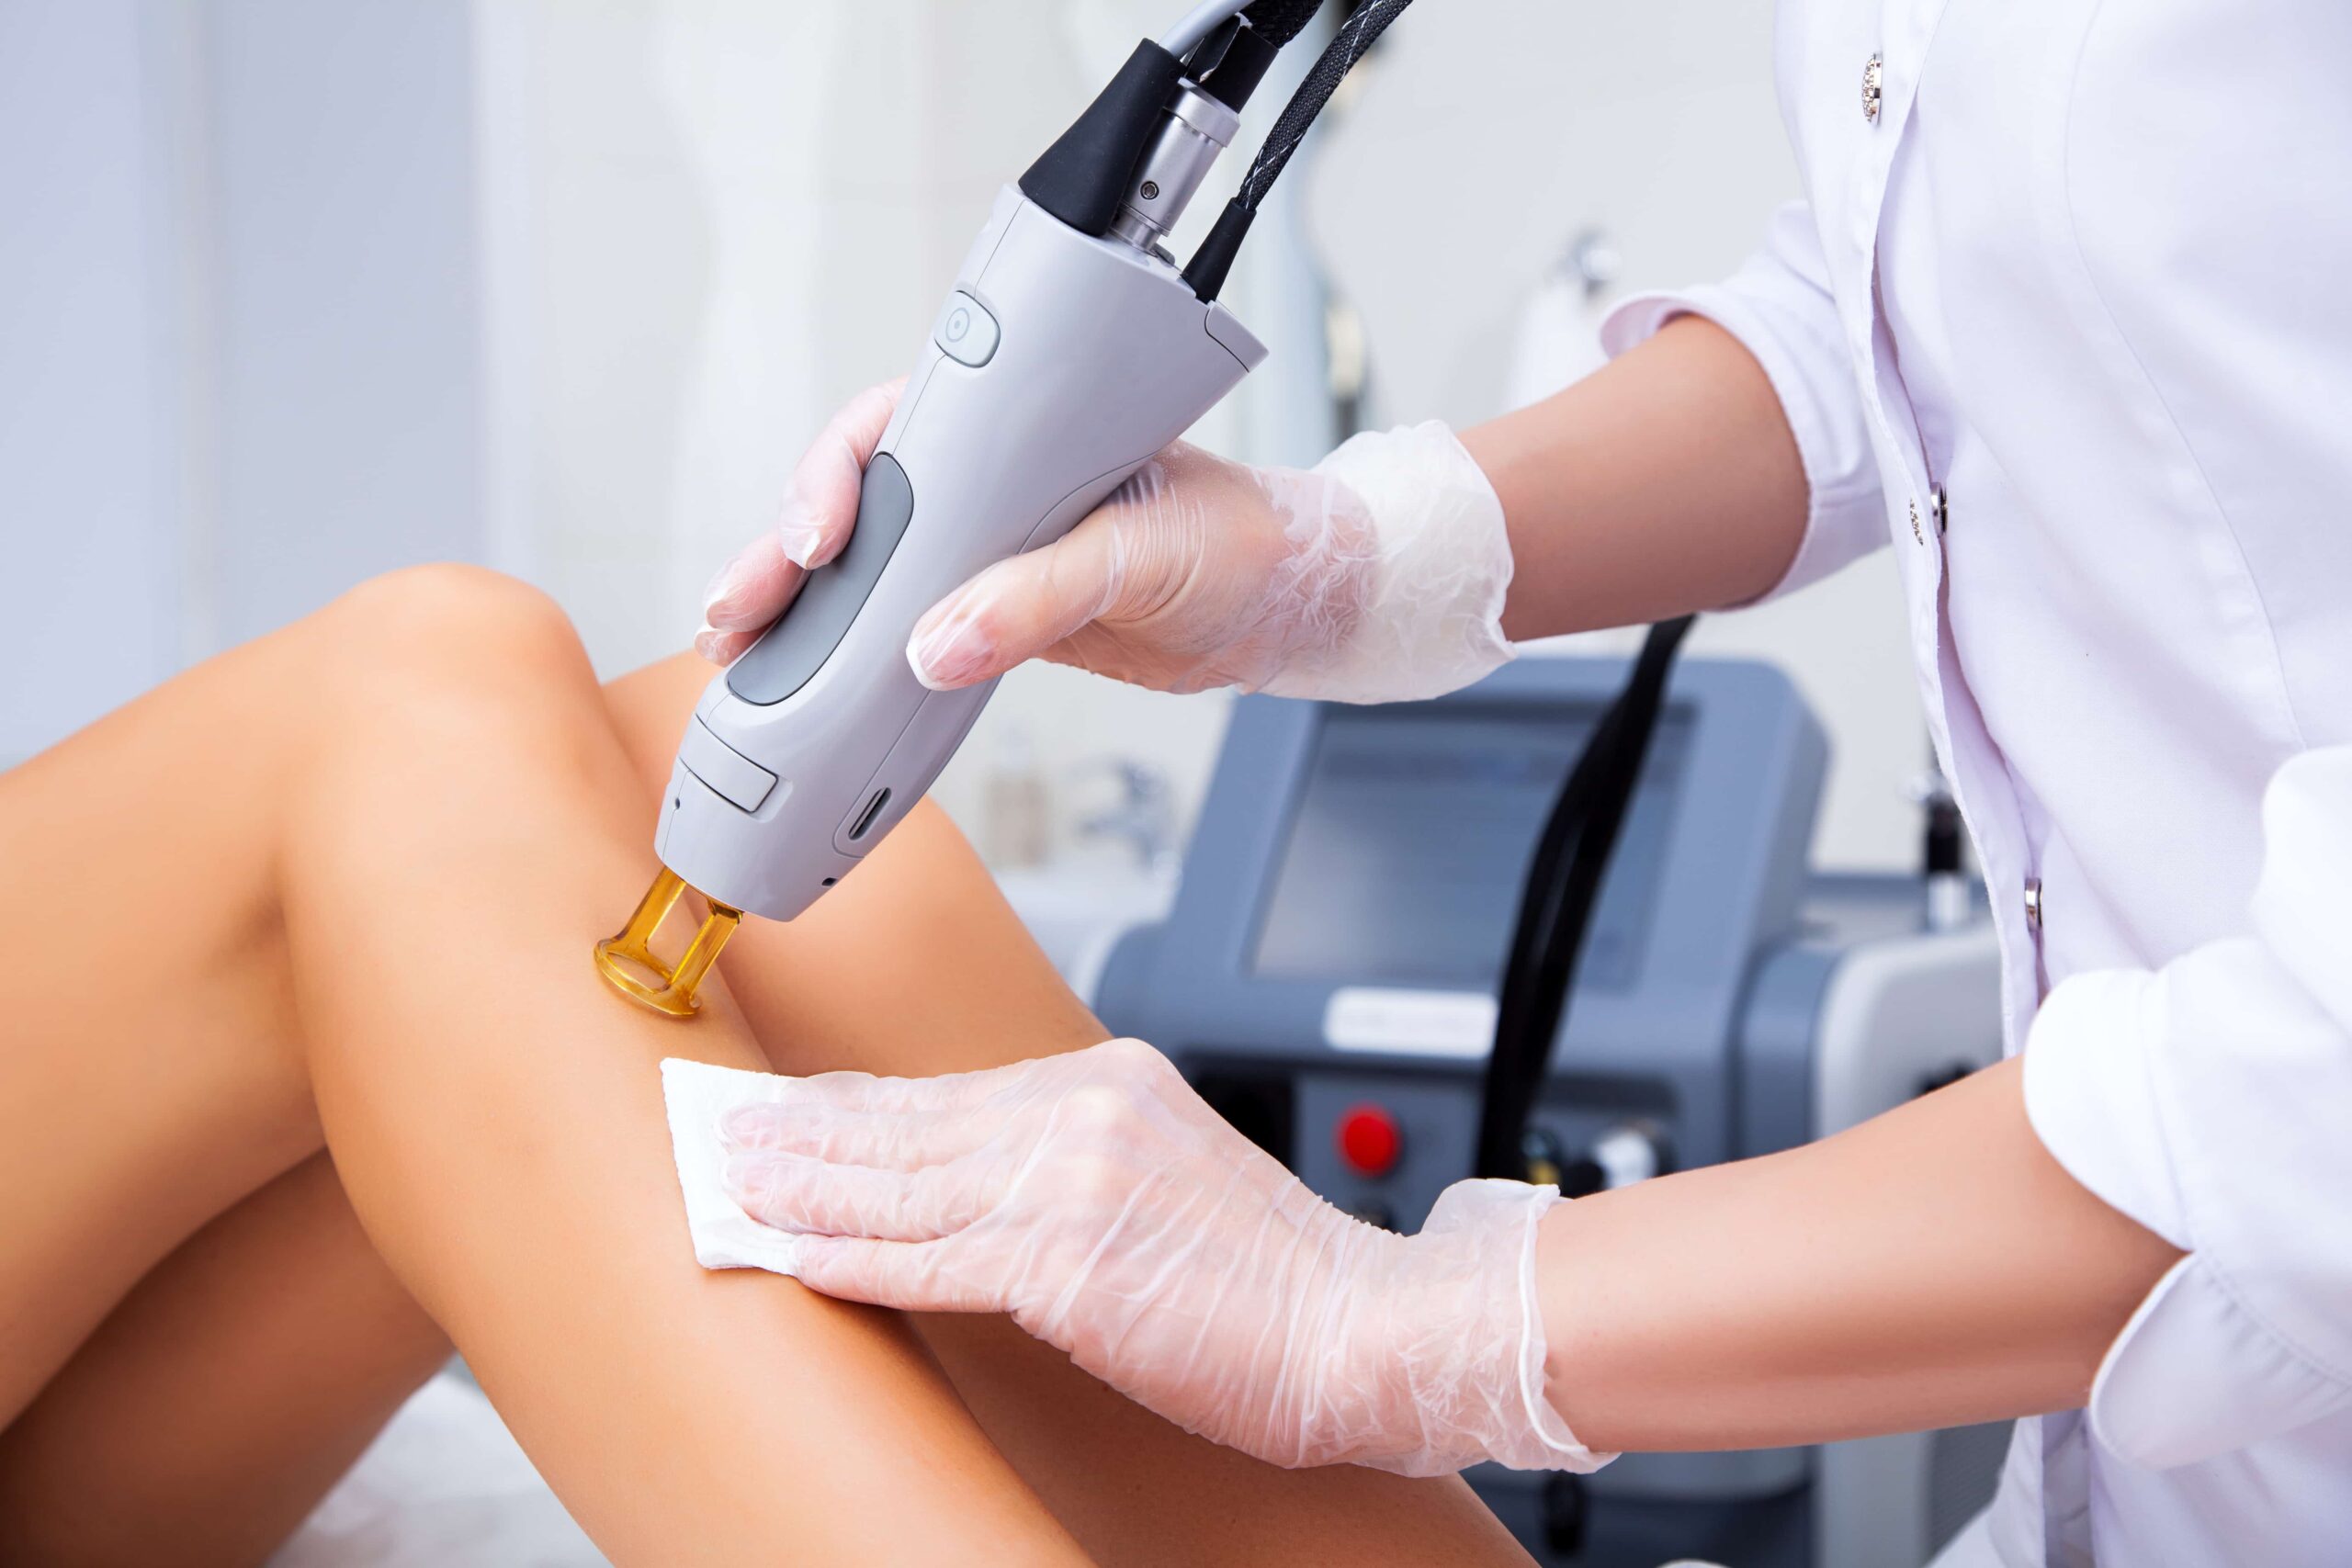 How Long Does Laser Hair Removal Actually Last?